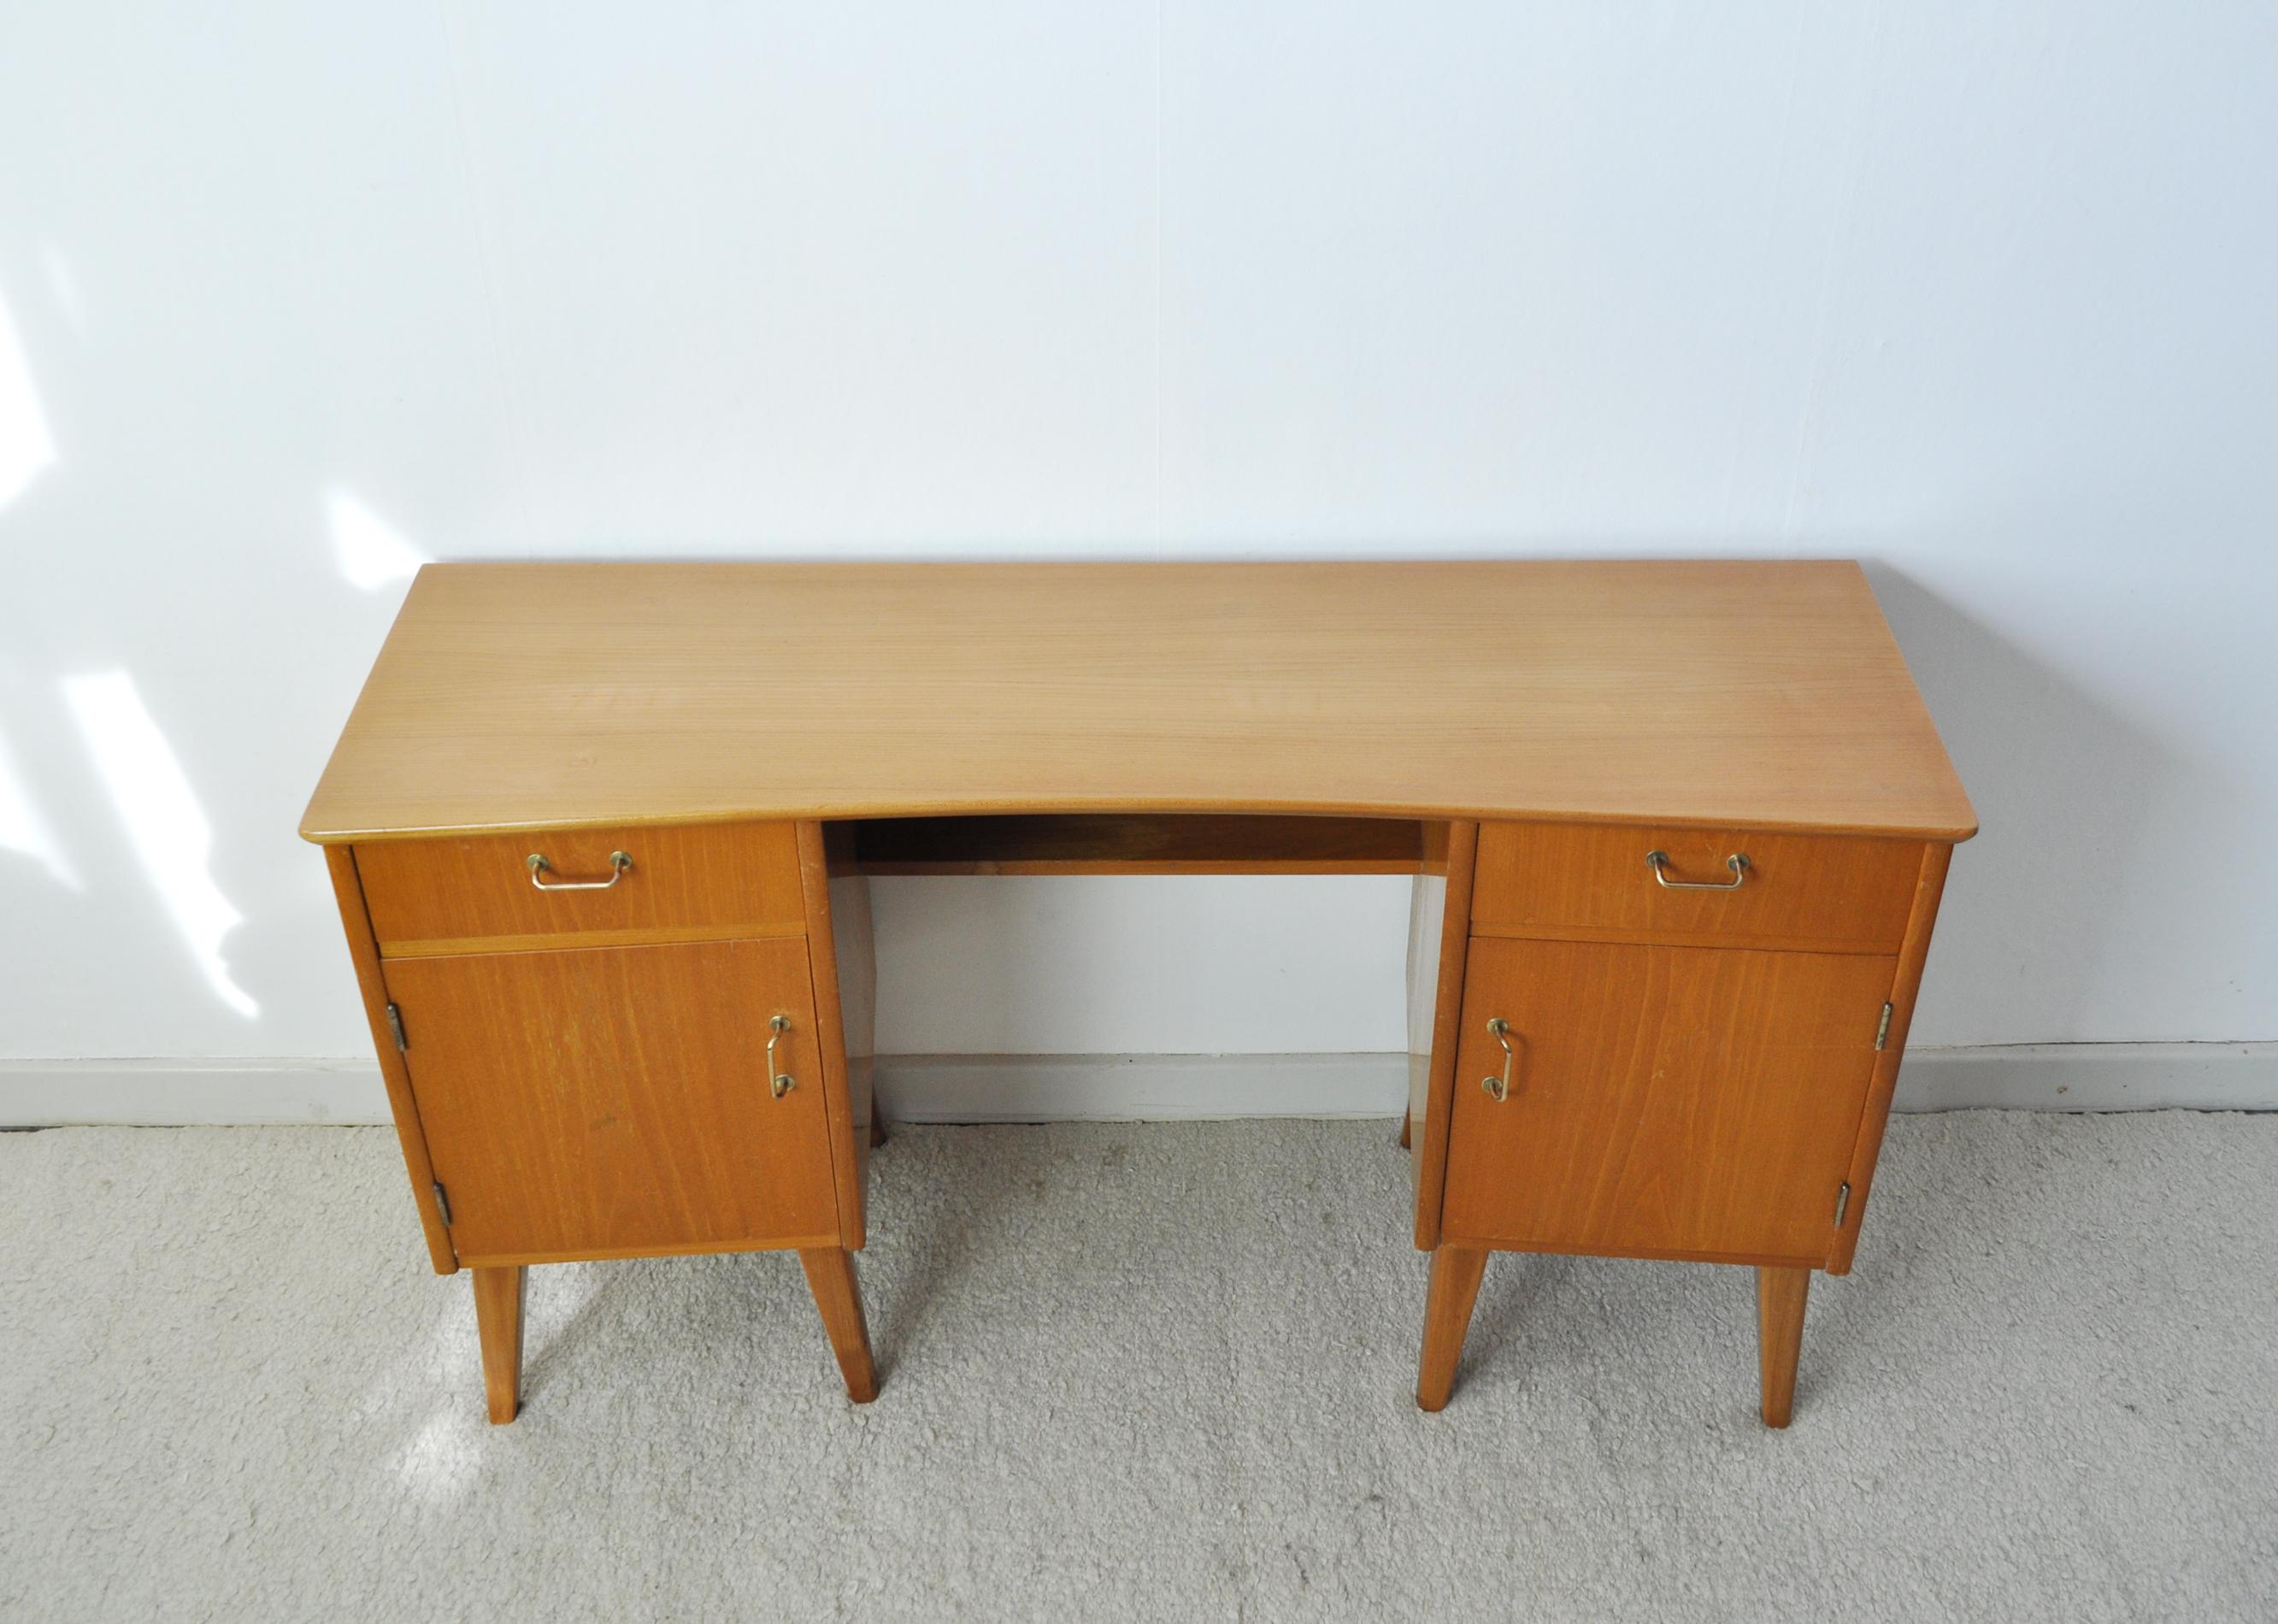 Danish Childs Executive Desk in Ash with Bowed Top, 1950s